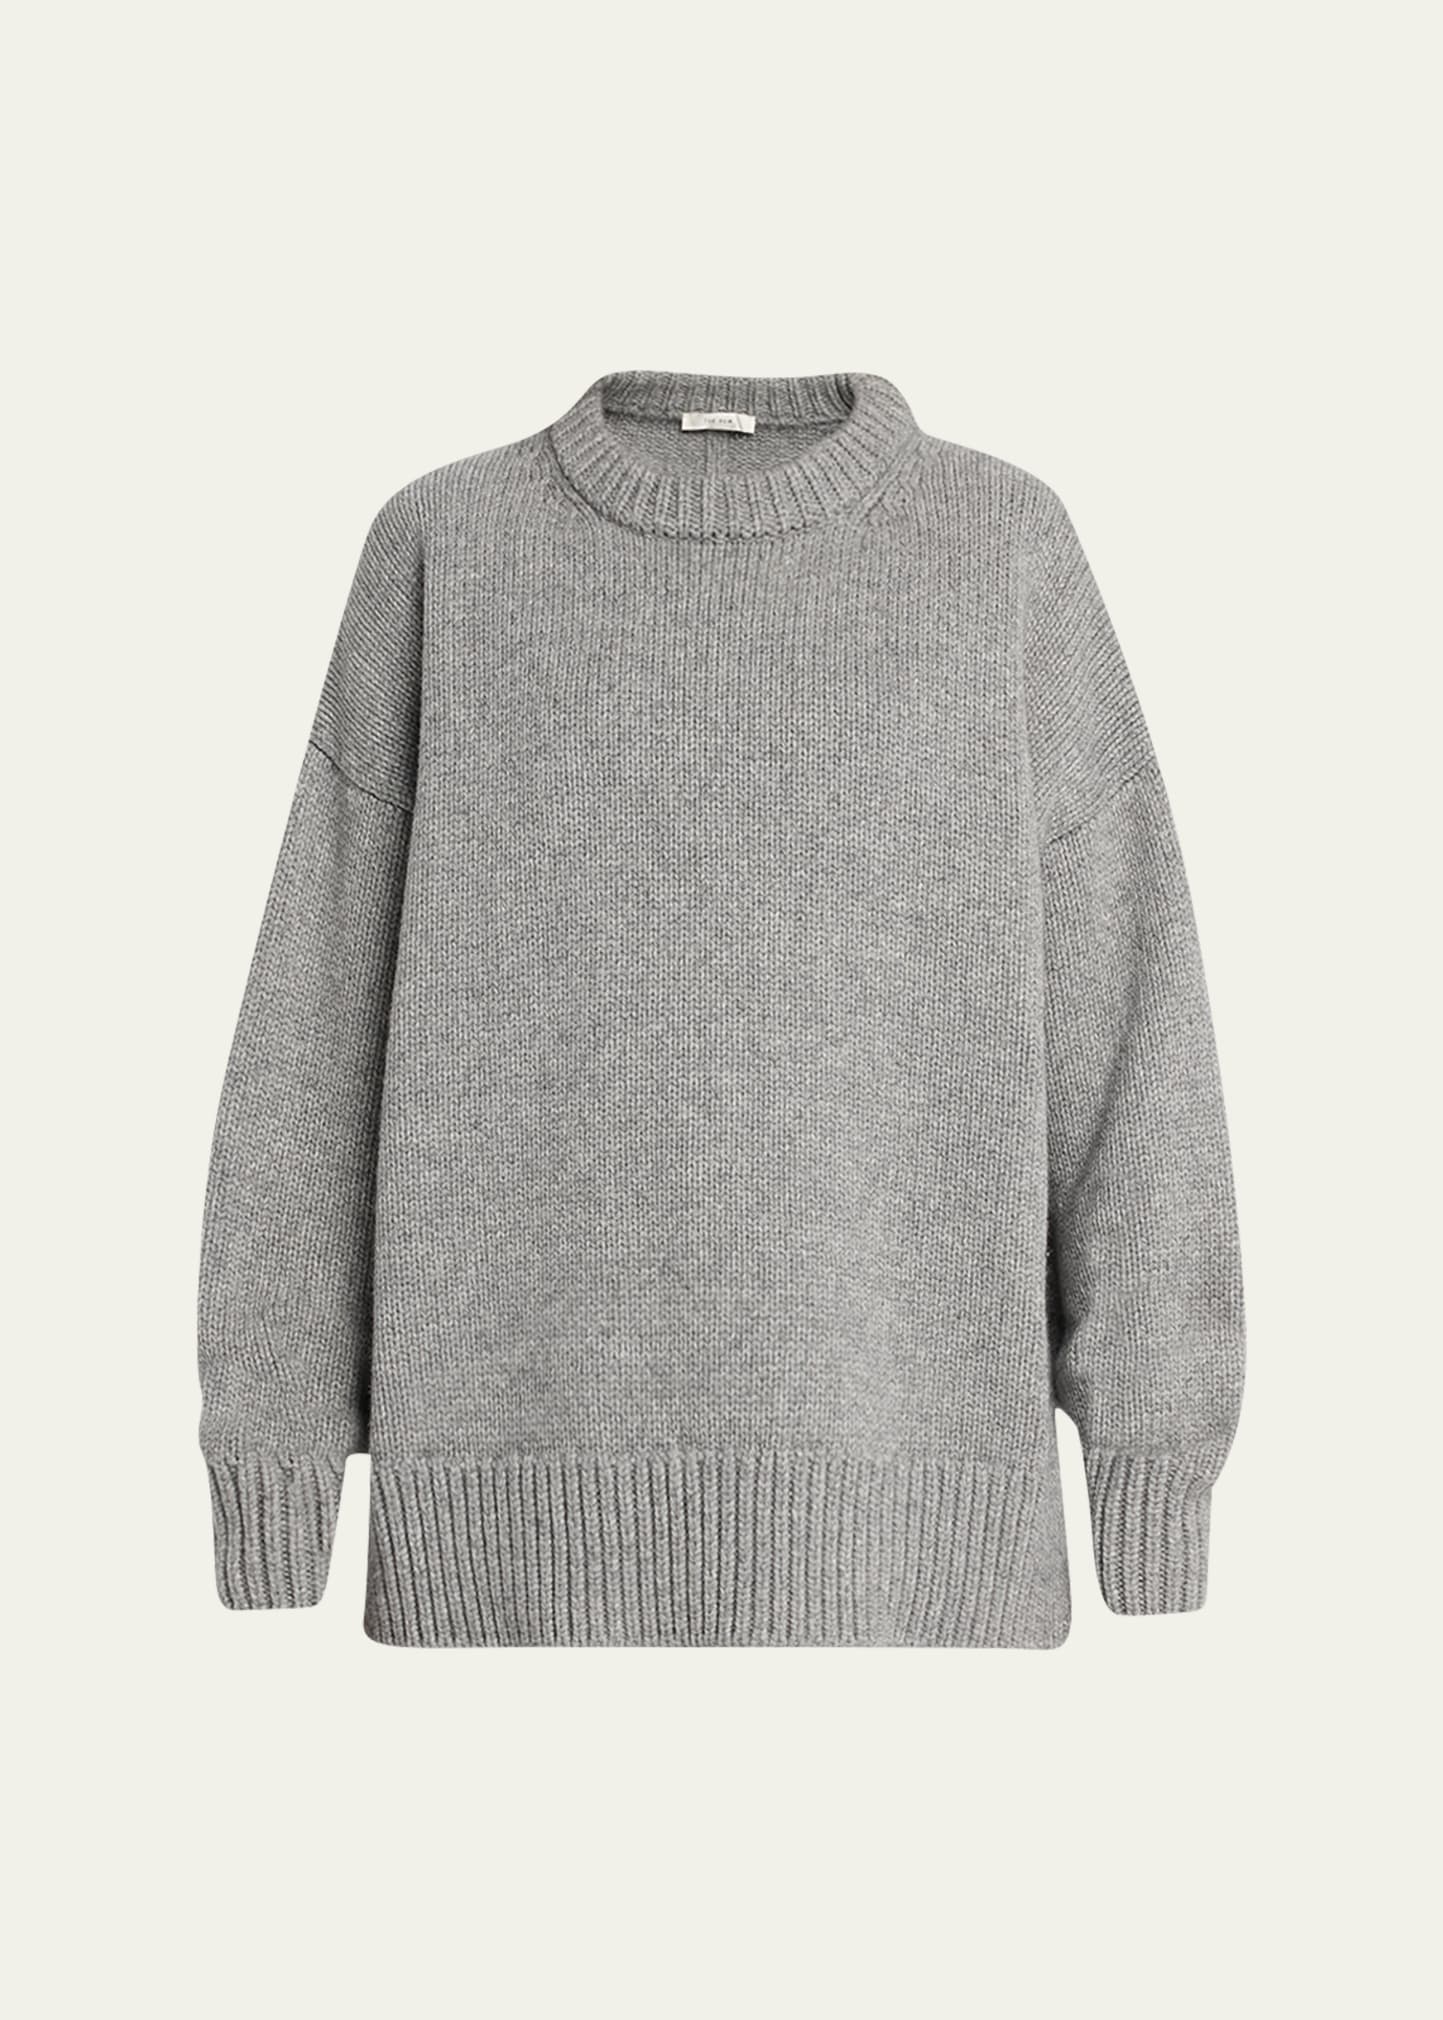 Navy Ophelia wool-blend sweater, The Row